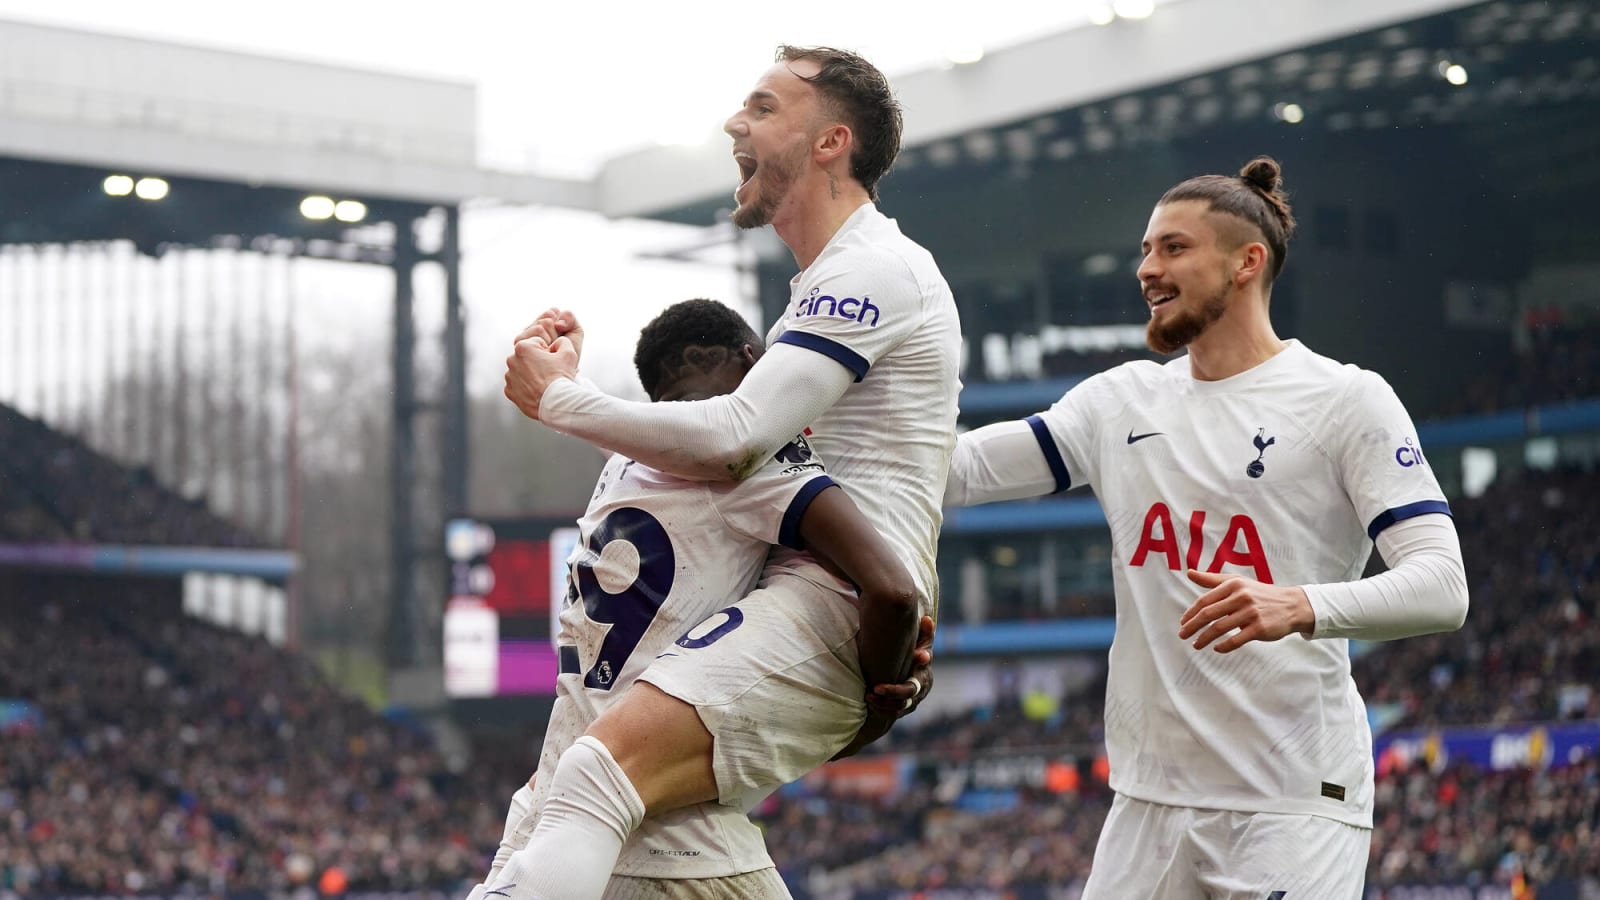 Spurs ace describes teammate as 'unbelievable' in 4-0 win at Villa